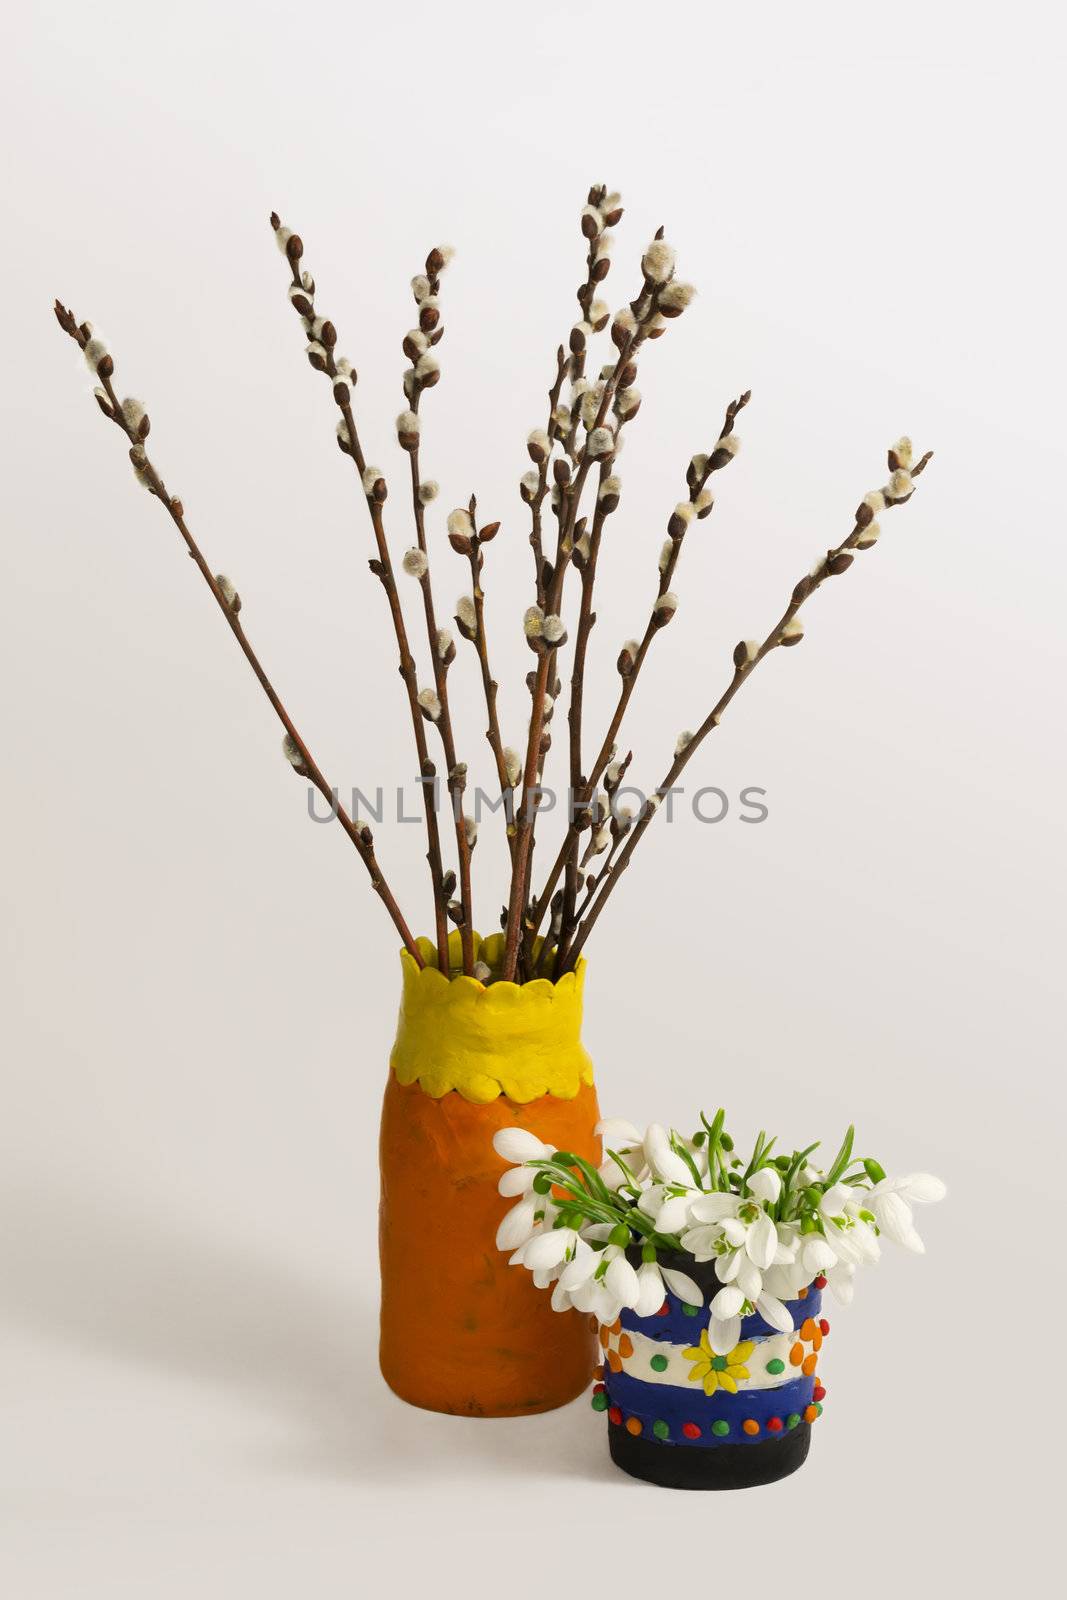 Spring still life with a bouquets of willows and snowdrops in the decorative plasticine vases on a light gray background.